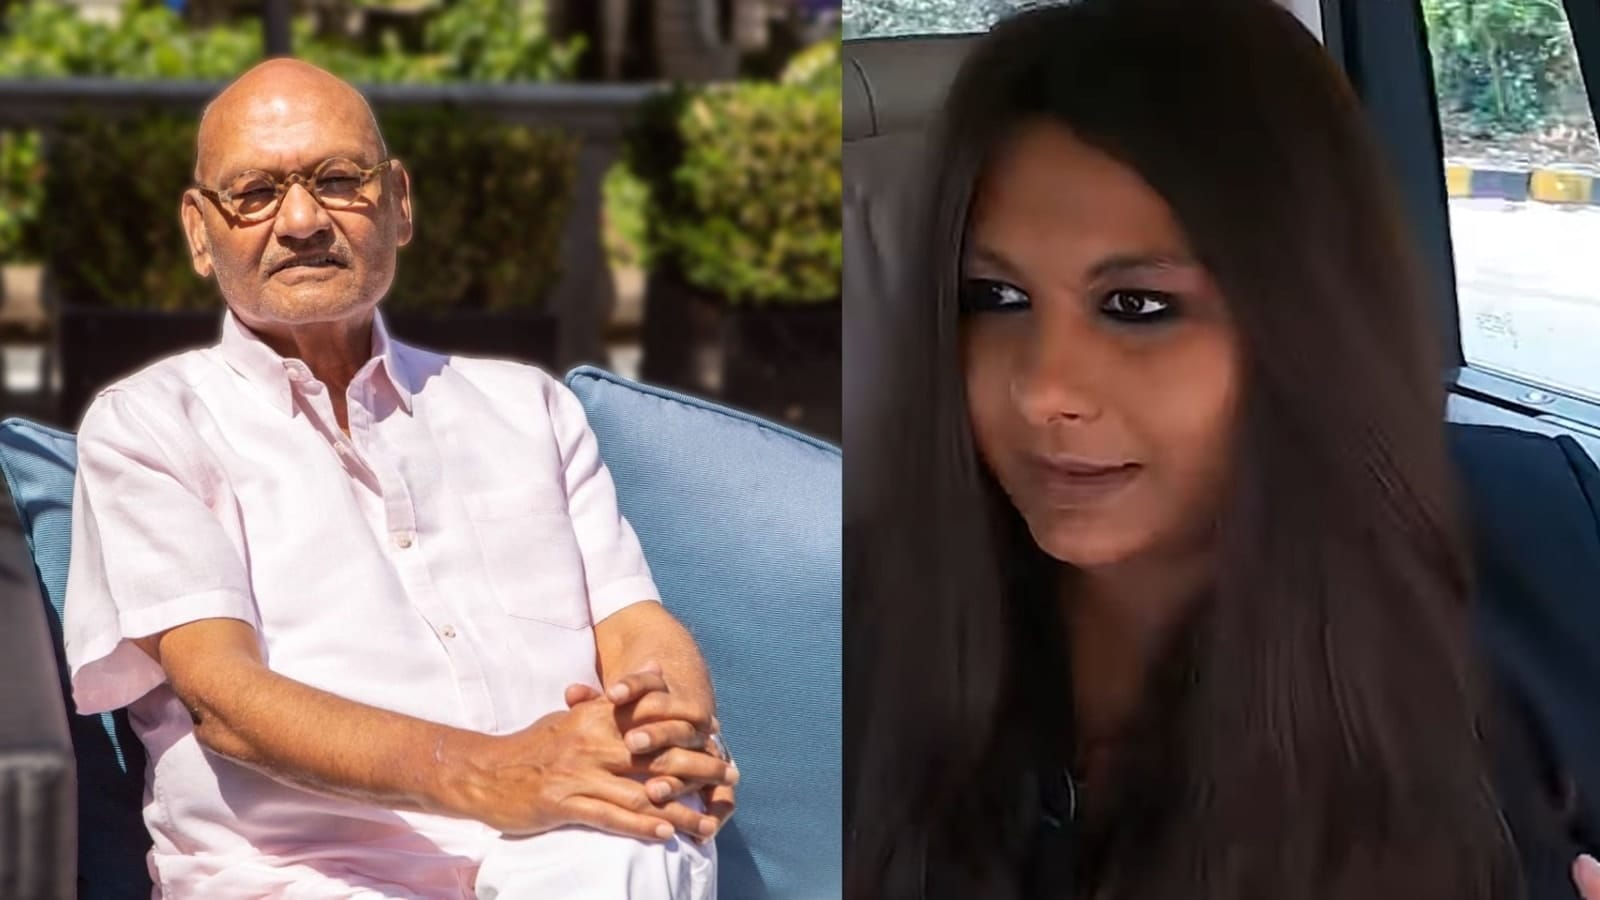 Billionaire Anil Agarwal’s daughter reveals facing racism in London: ‘No one wanted to sit next to me’